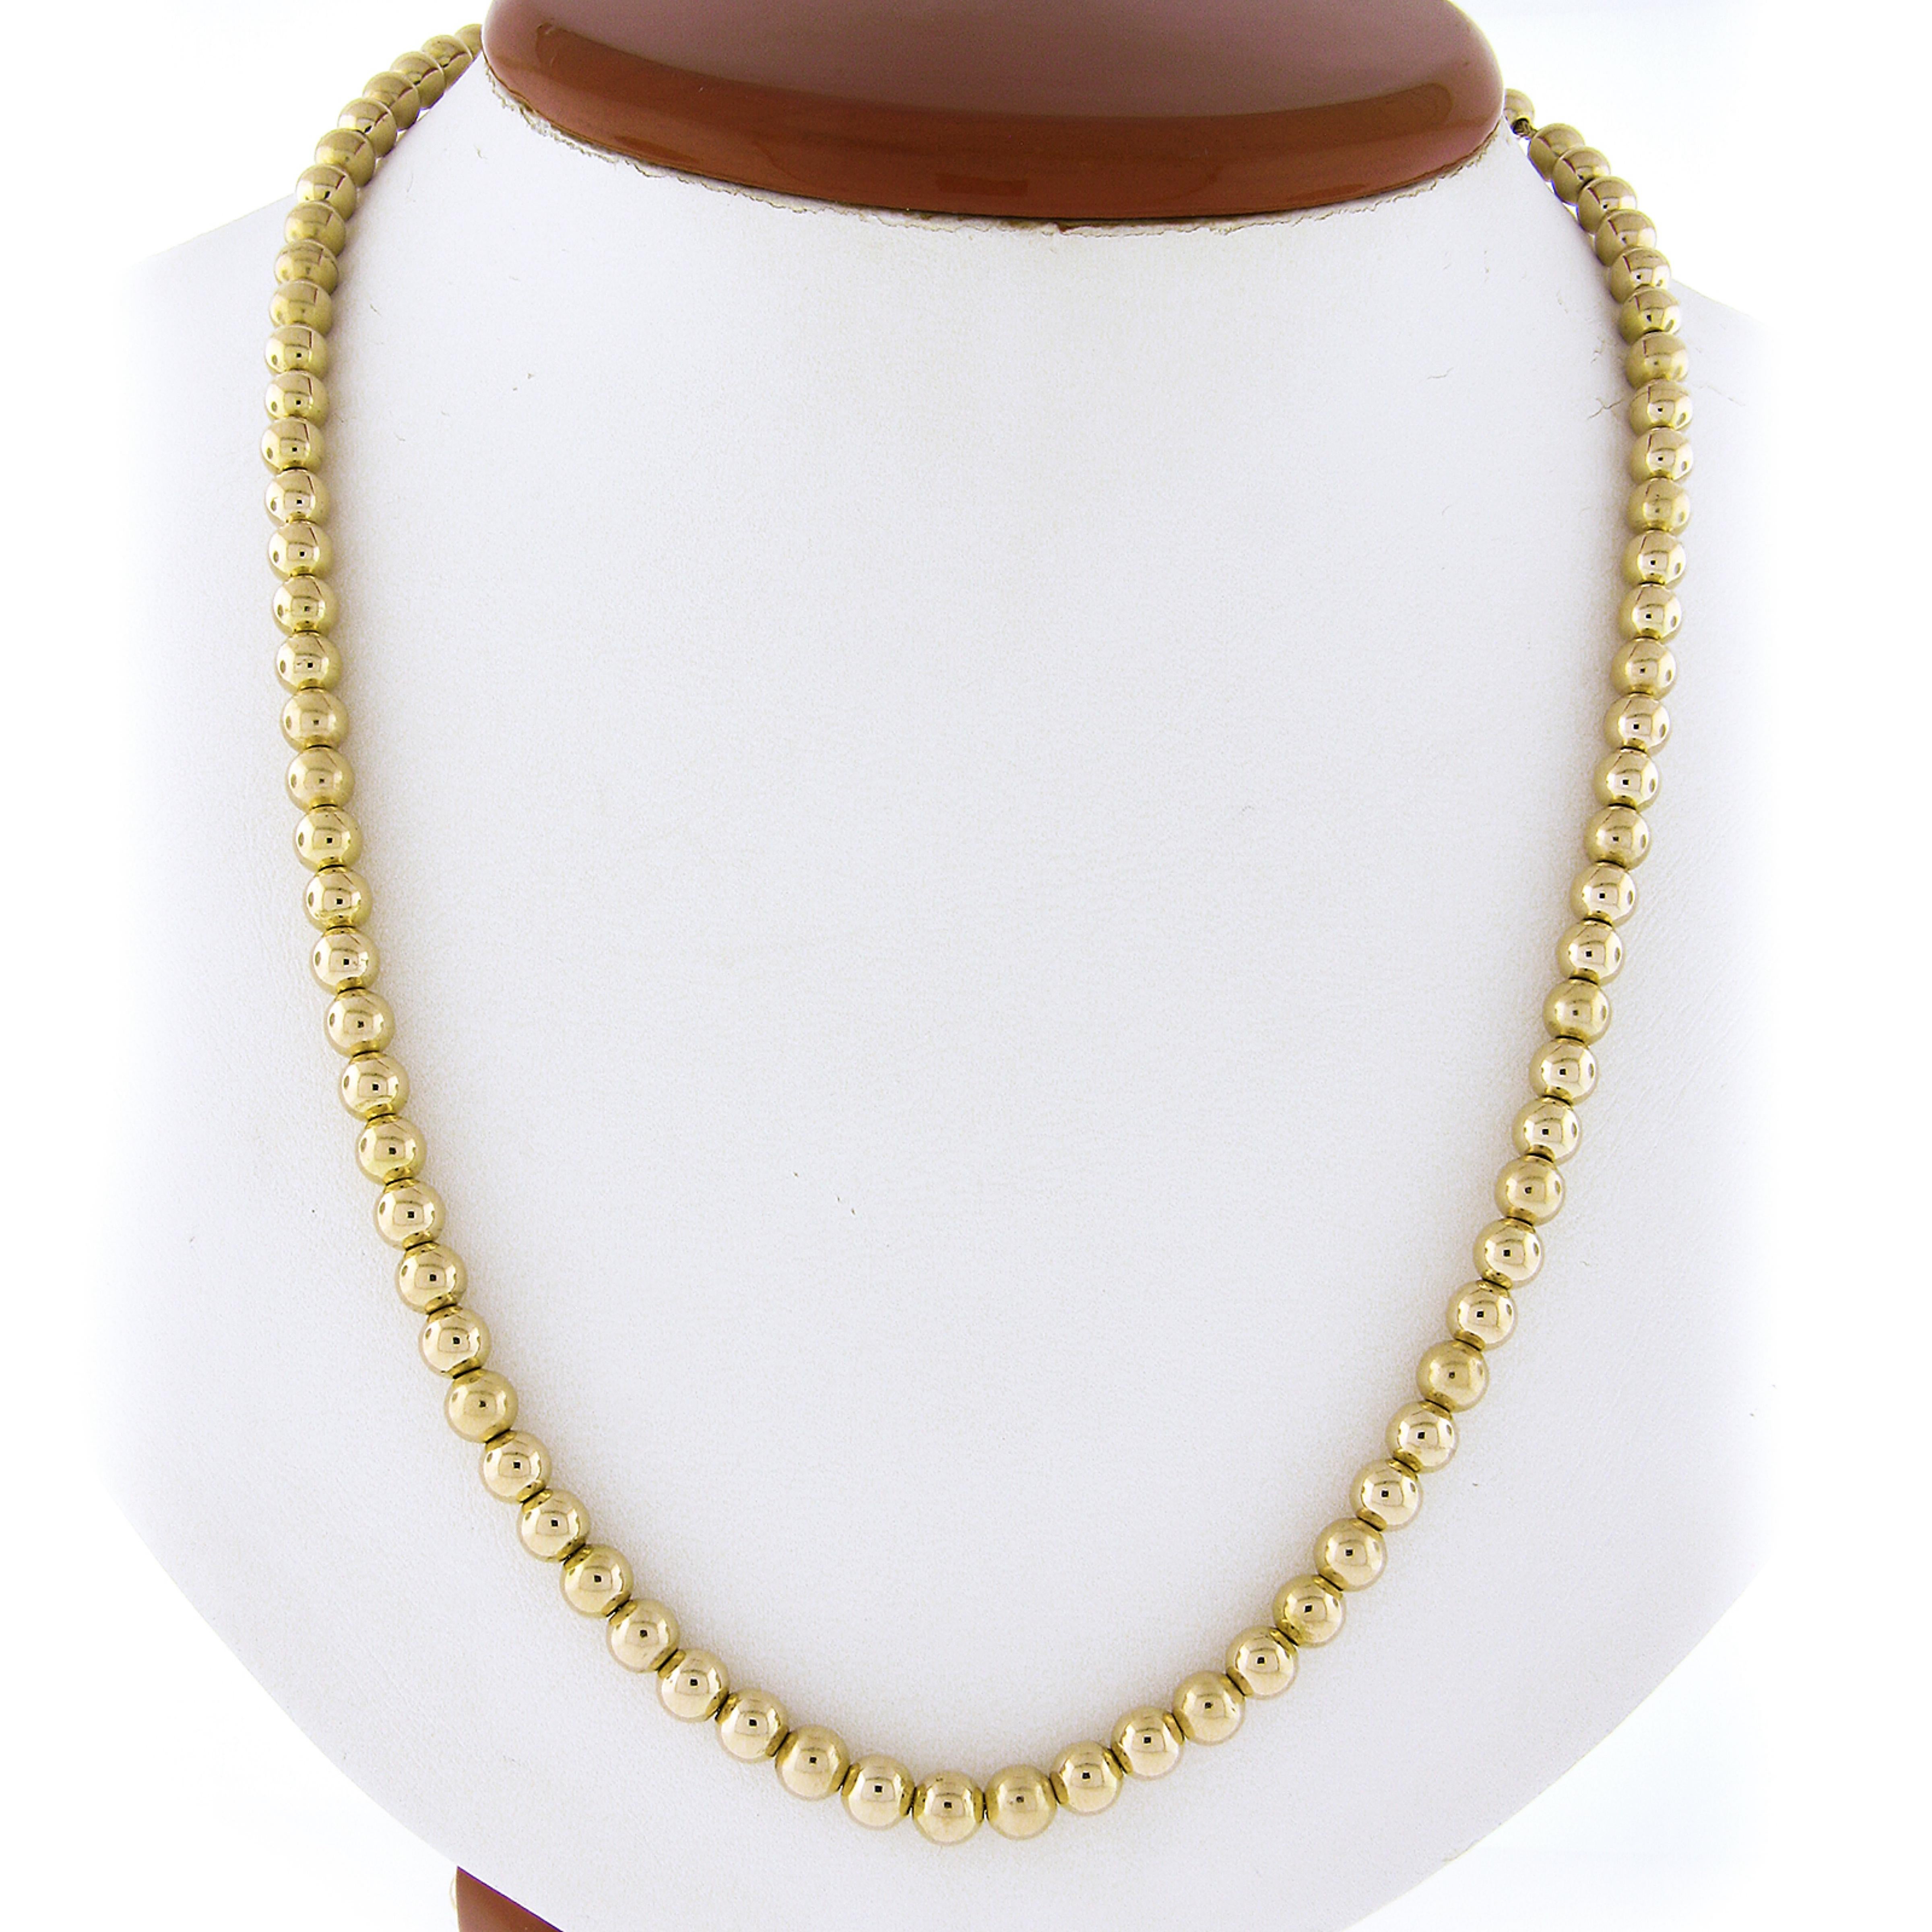 This Italian vintage well made polished bead/ball on a wheat link chain necklace is crafted in solid 14k yellow gold. The necklace is 31 inches long, 5.15mm thick, and is secured with a sturdy lobster claw clasp that ensures safe wear. Perfect for